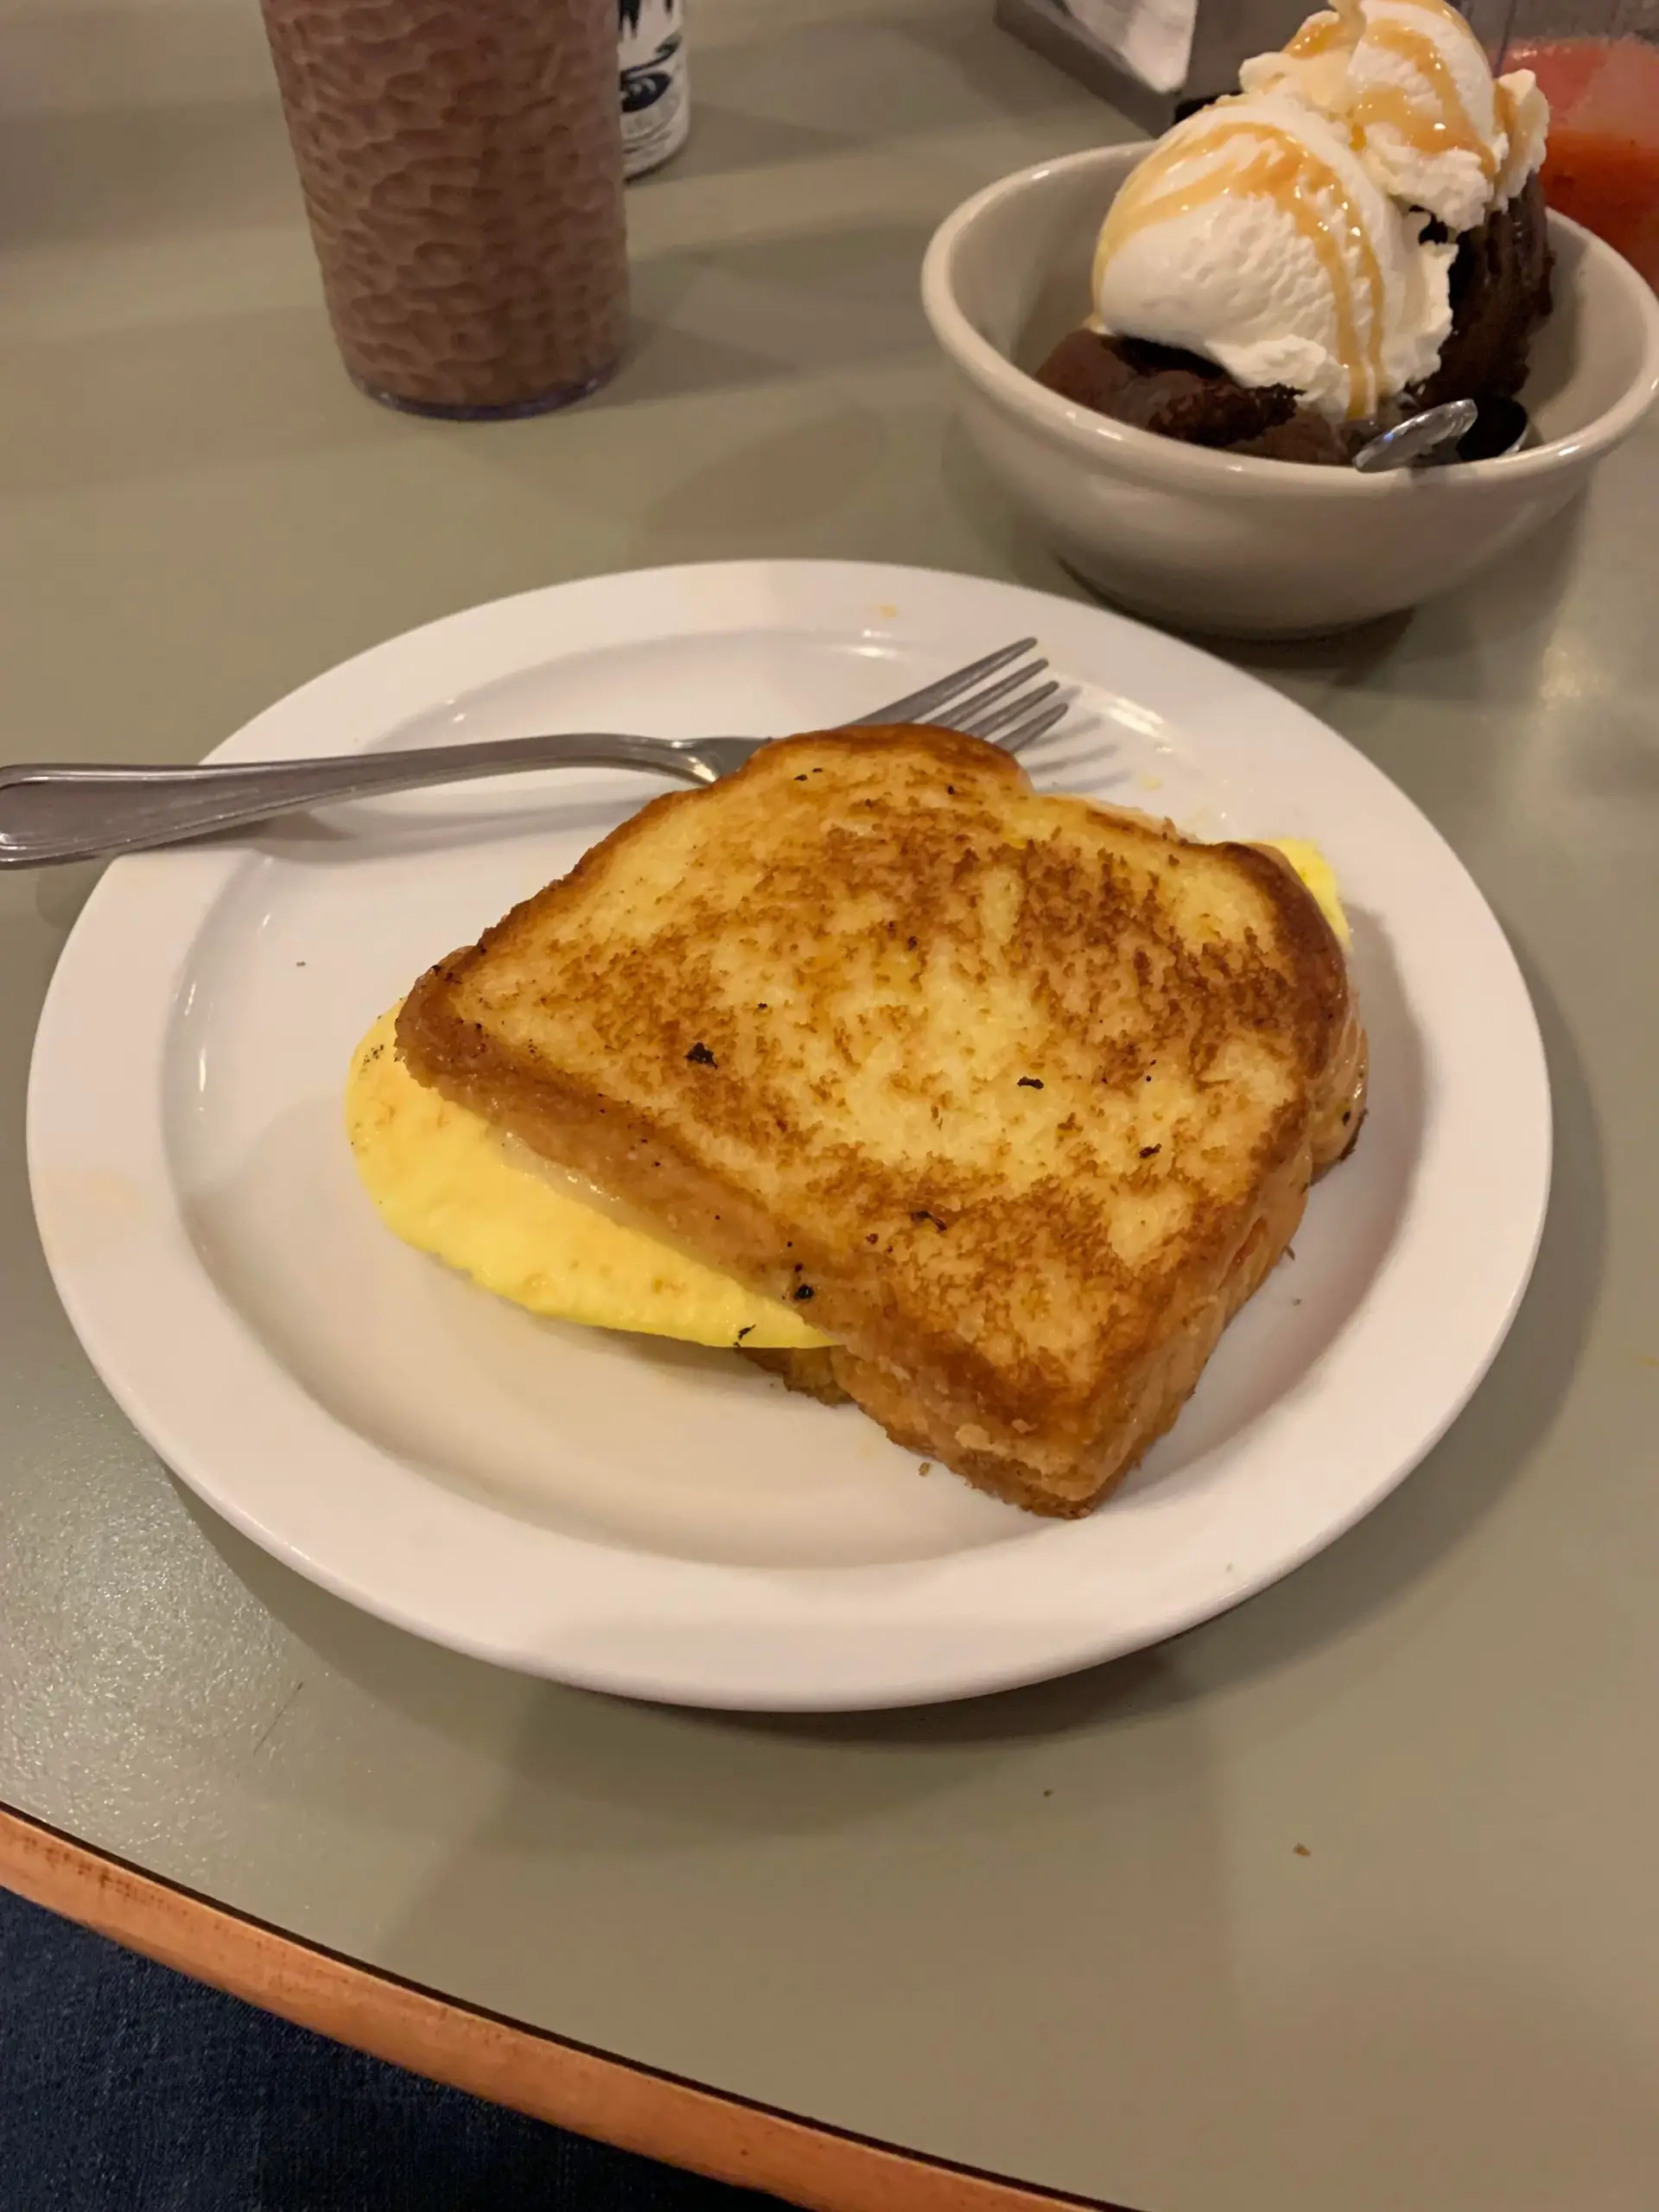 My school was serving cheese omelets, so I had to put one ...